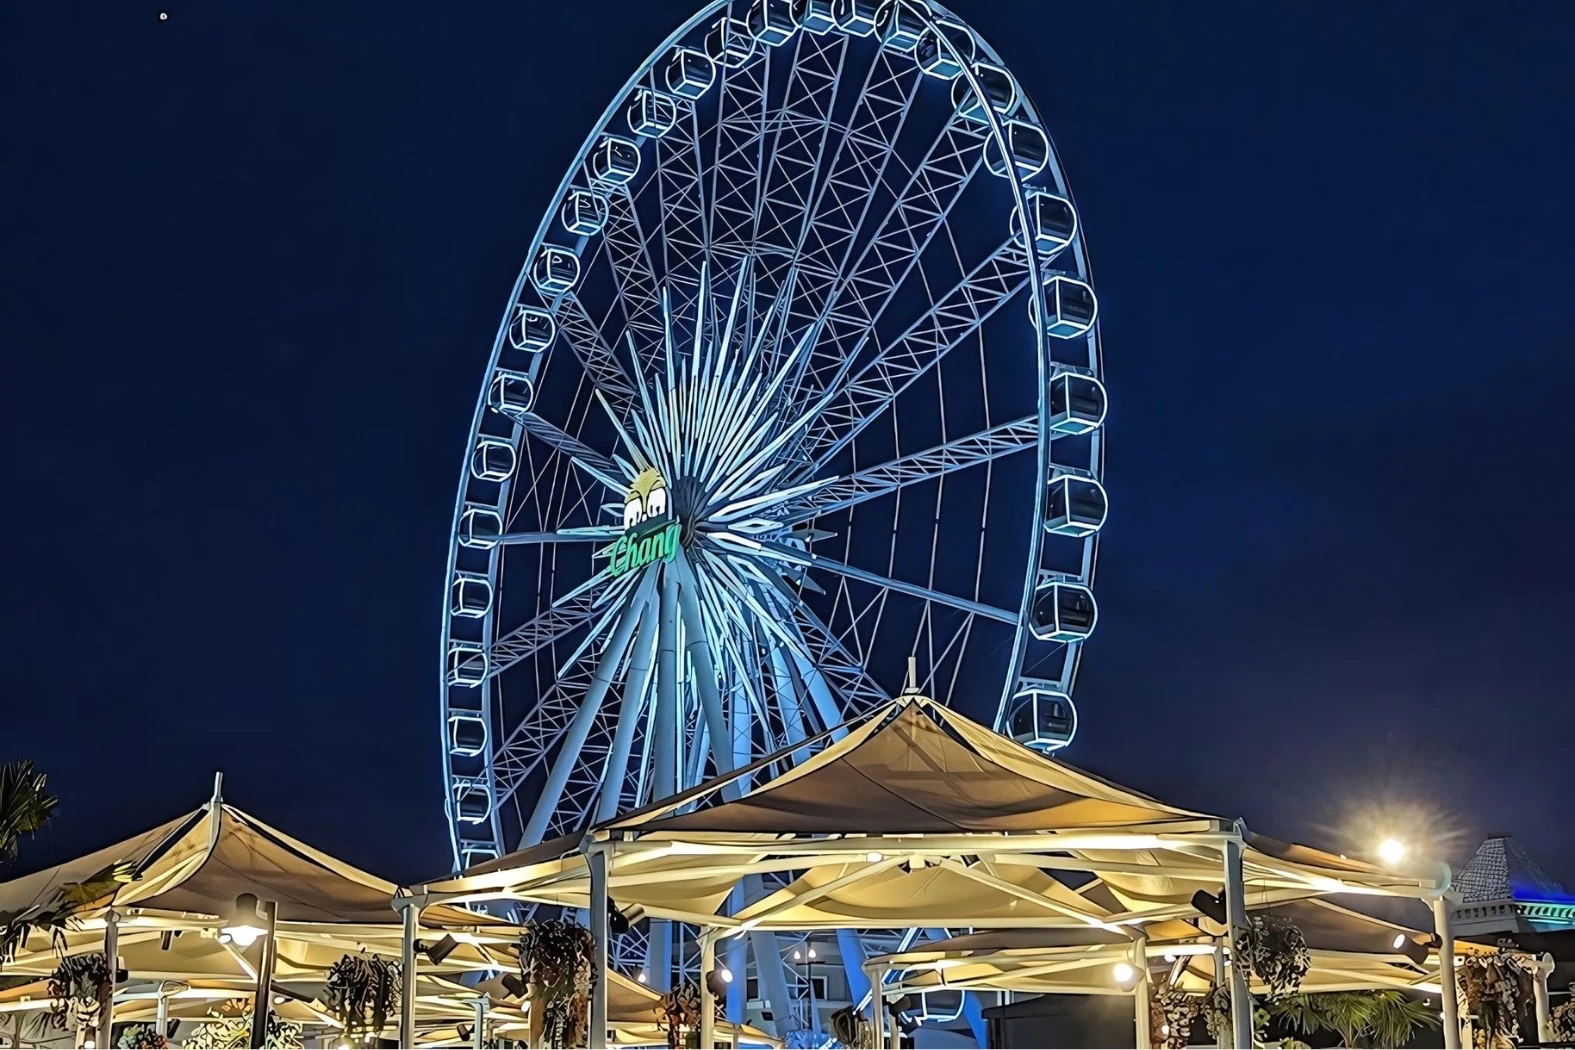 Here is the Asiatique Sky Wheel situated in the night market of Phra Panong in Bangkok.